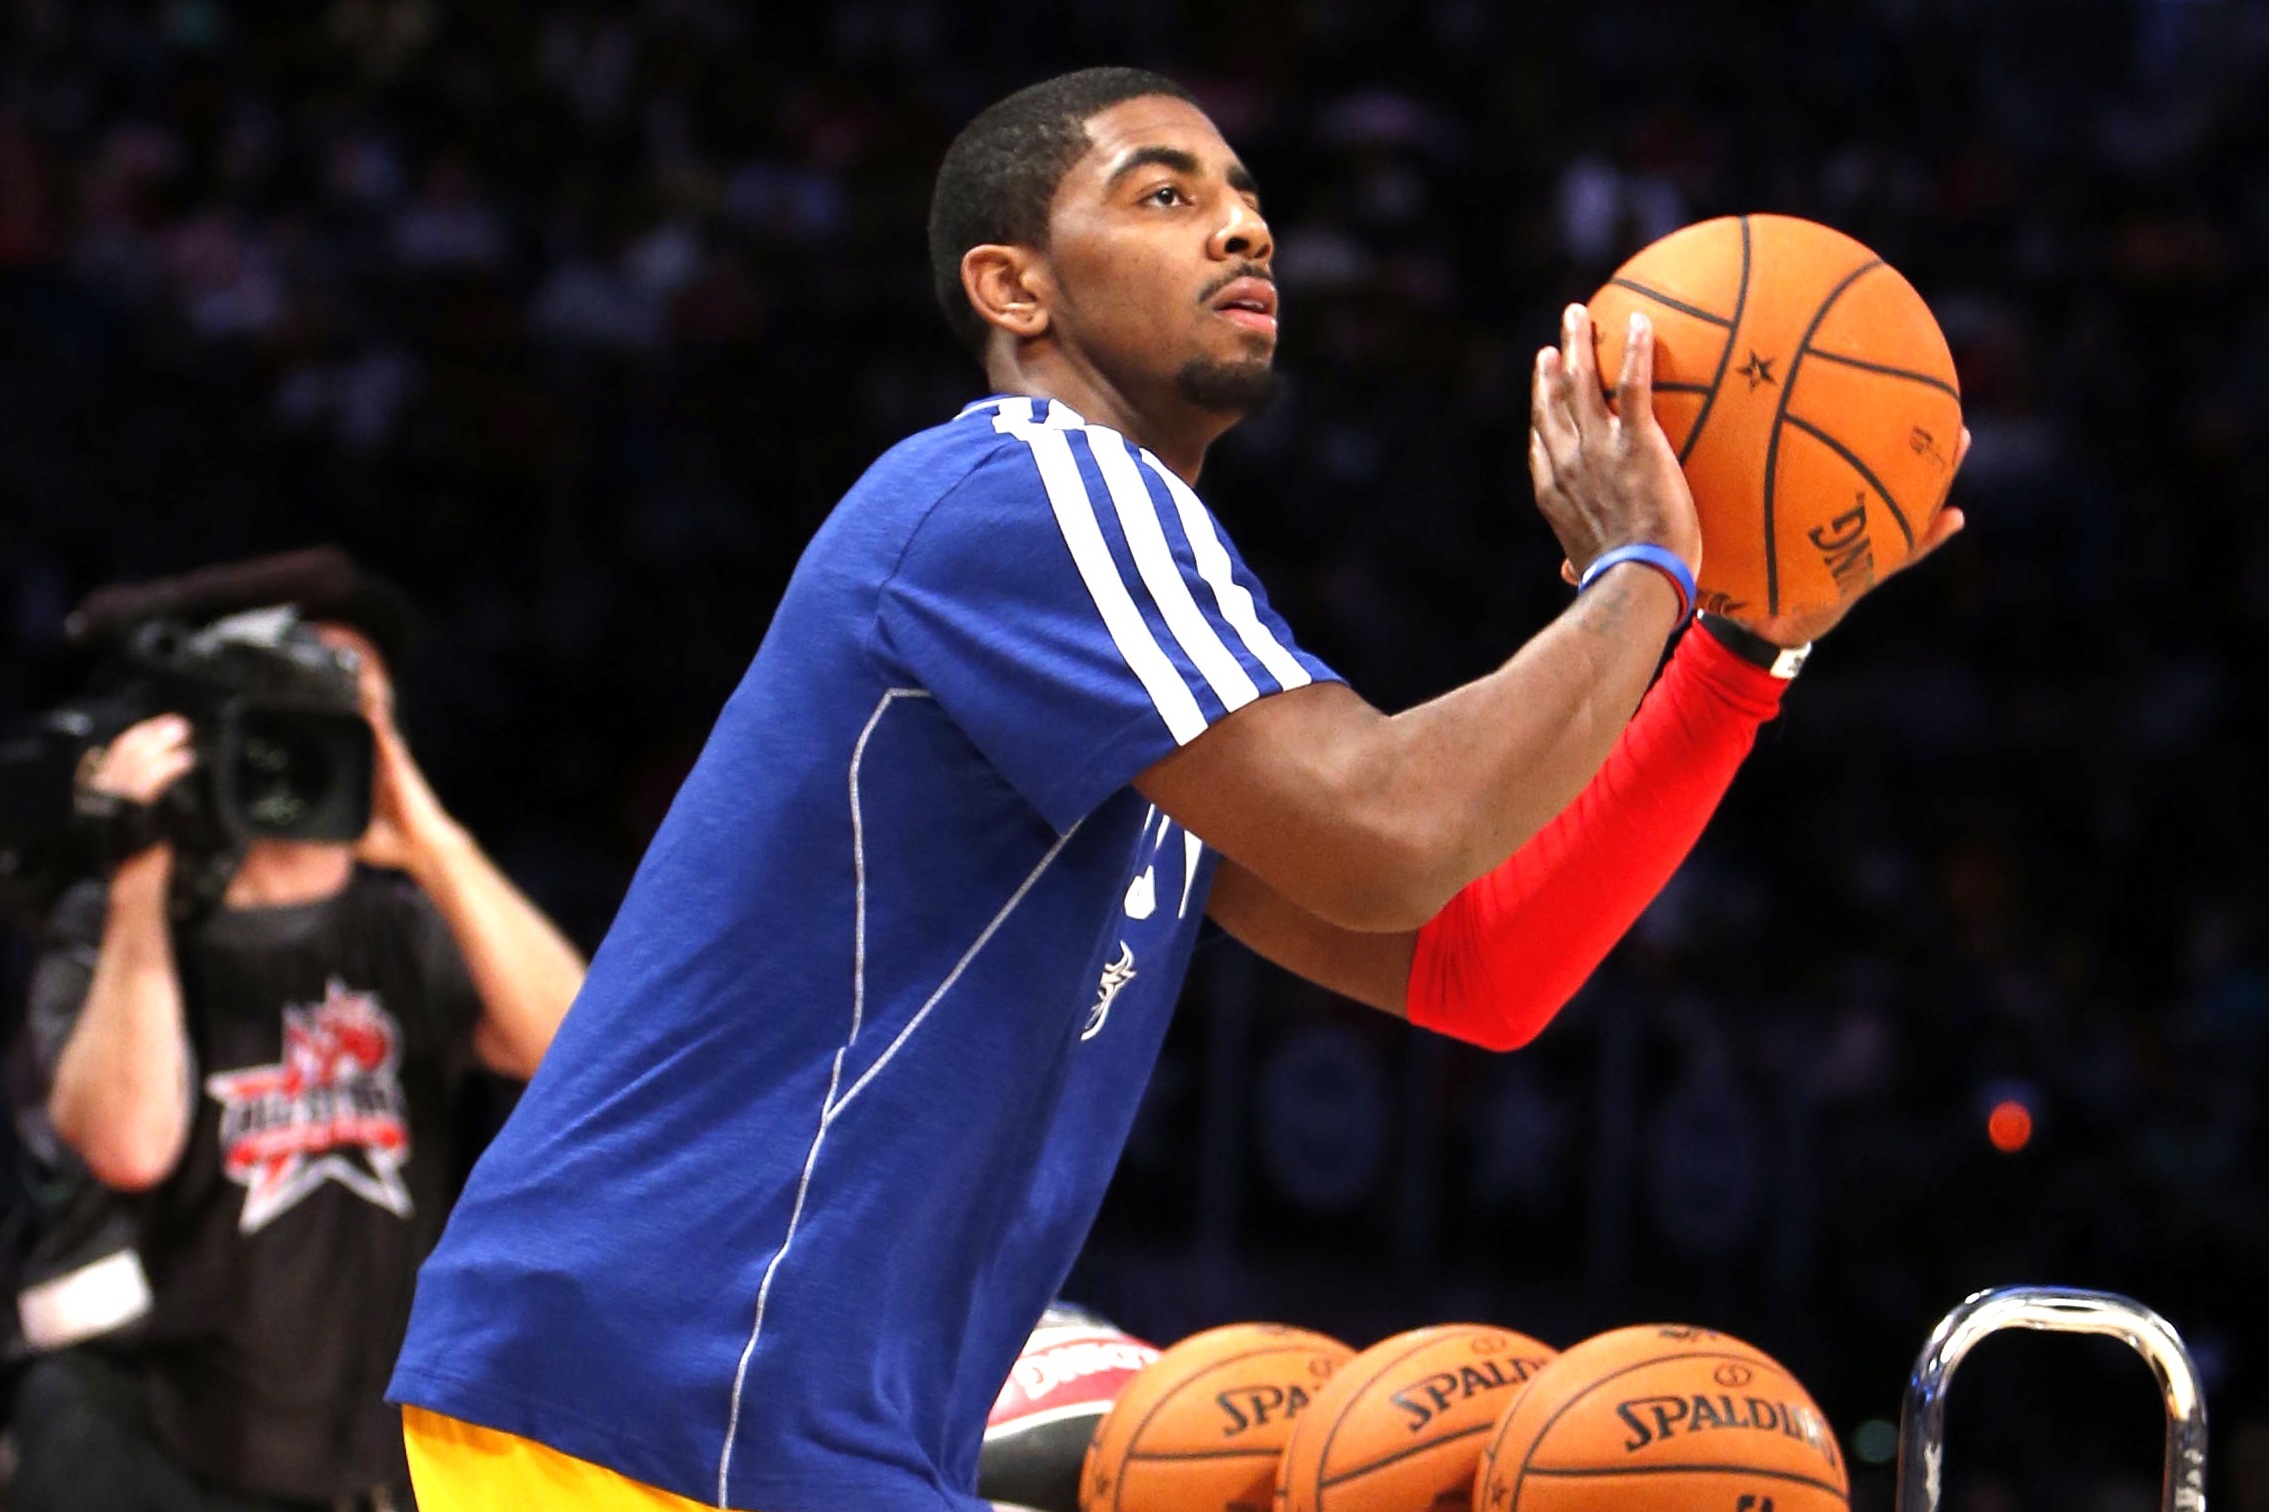 Cleveland's Kyrie Irving wins 3-point contest - The San Diego Union-Tribune